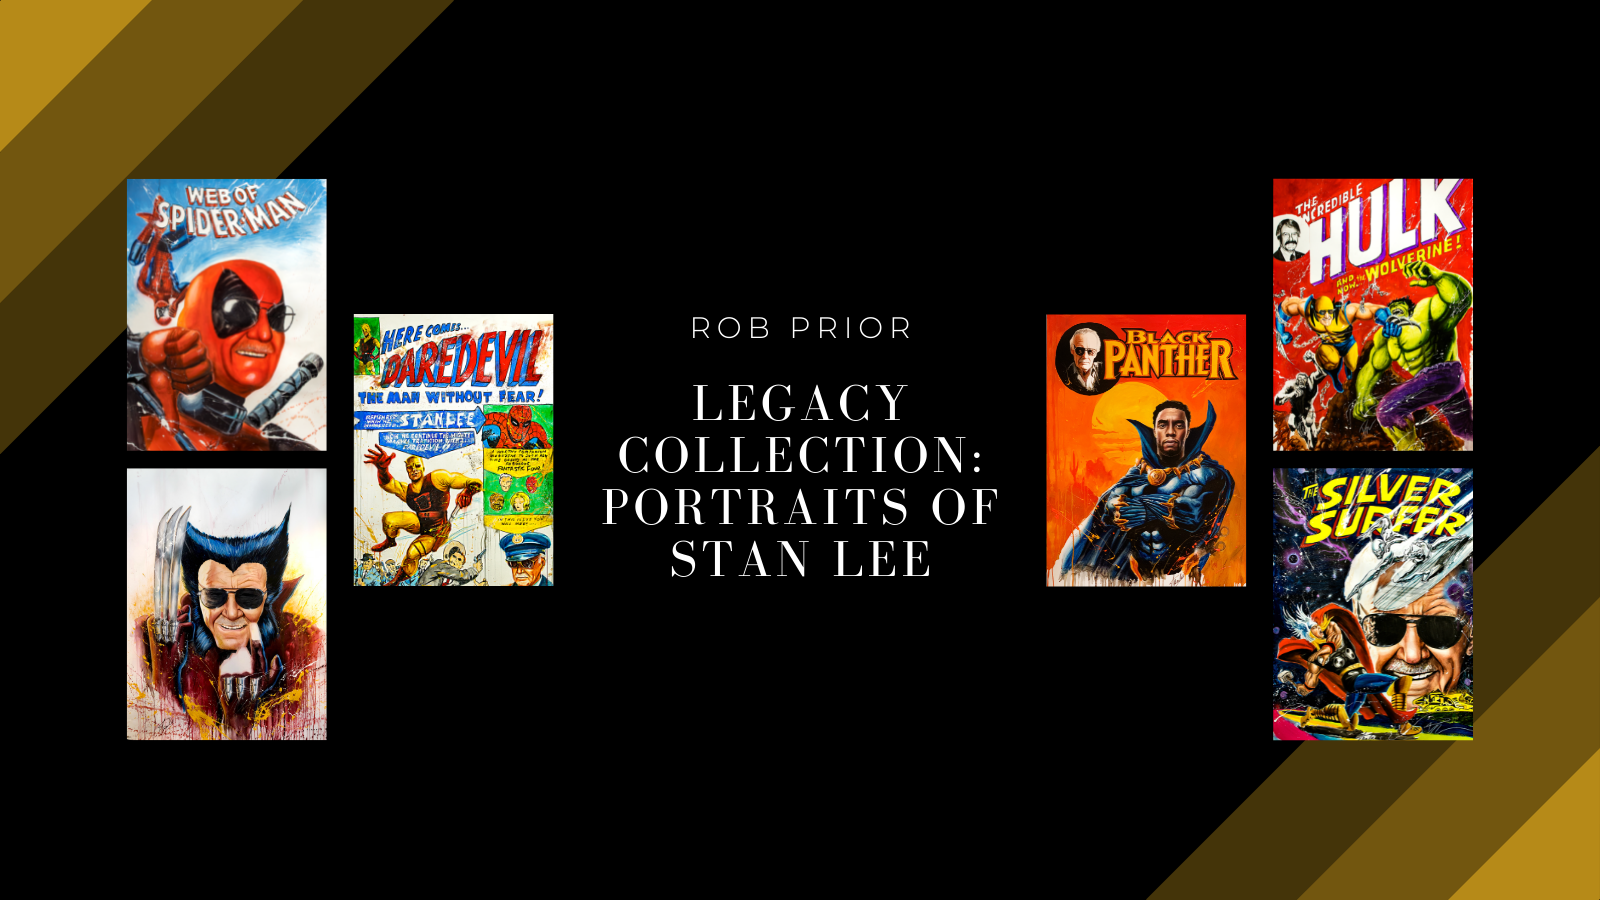 The Legacy Collection: Portraits of Stan Lee by Rob Prior